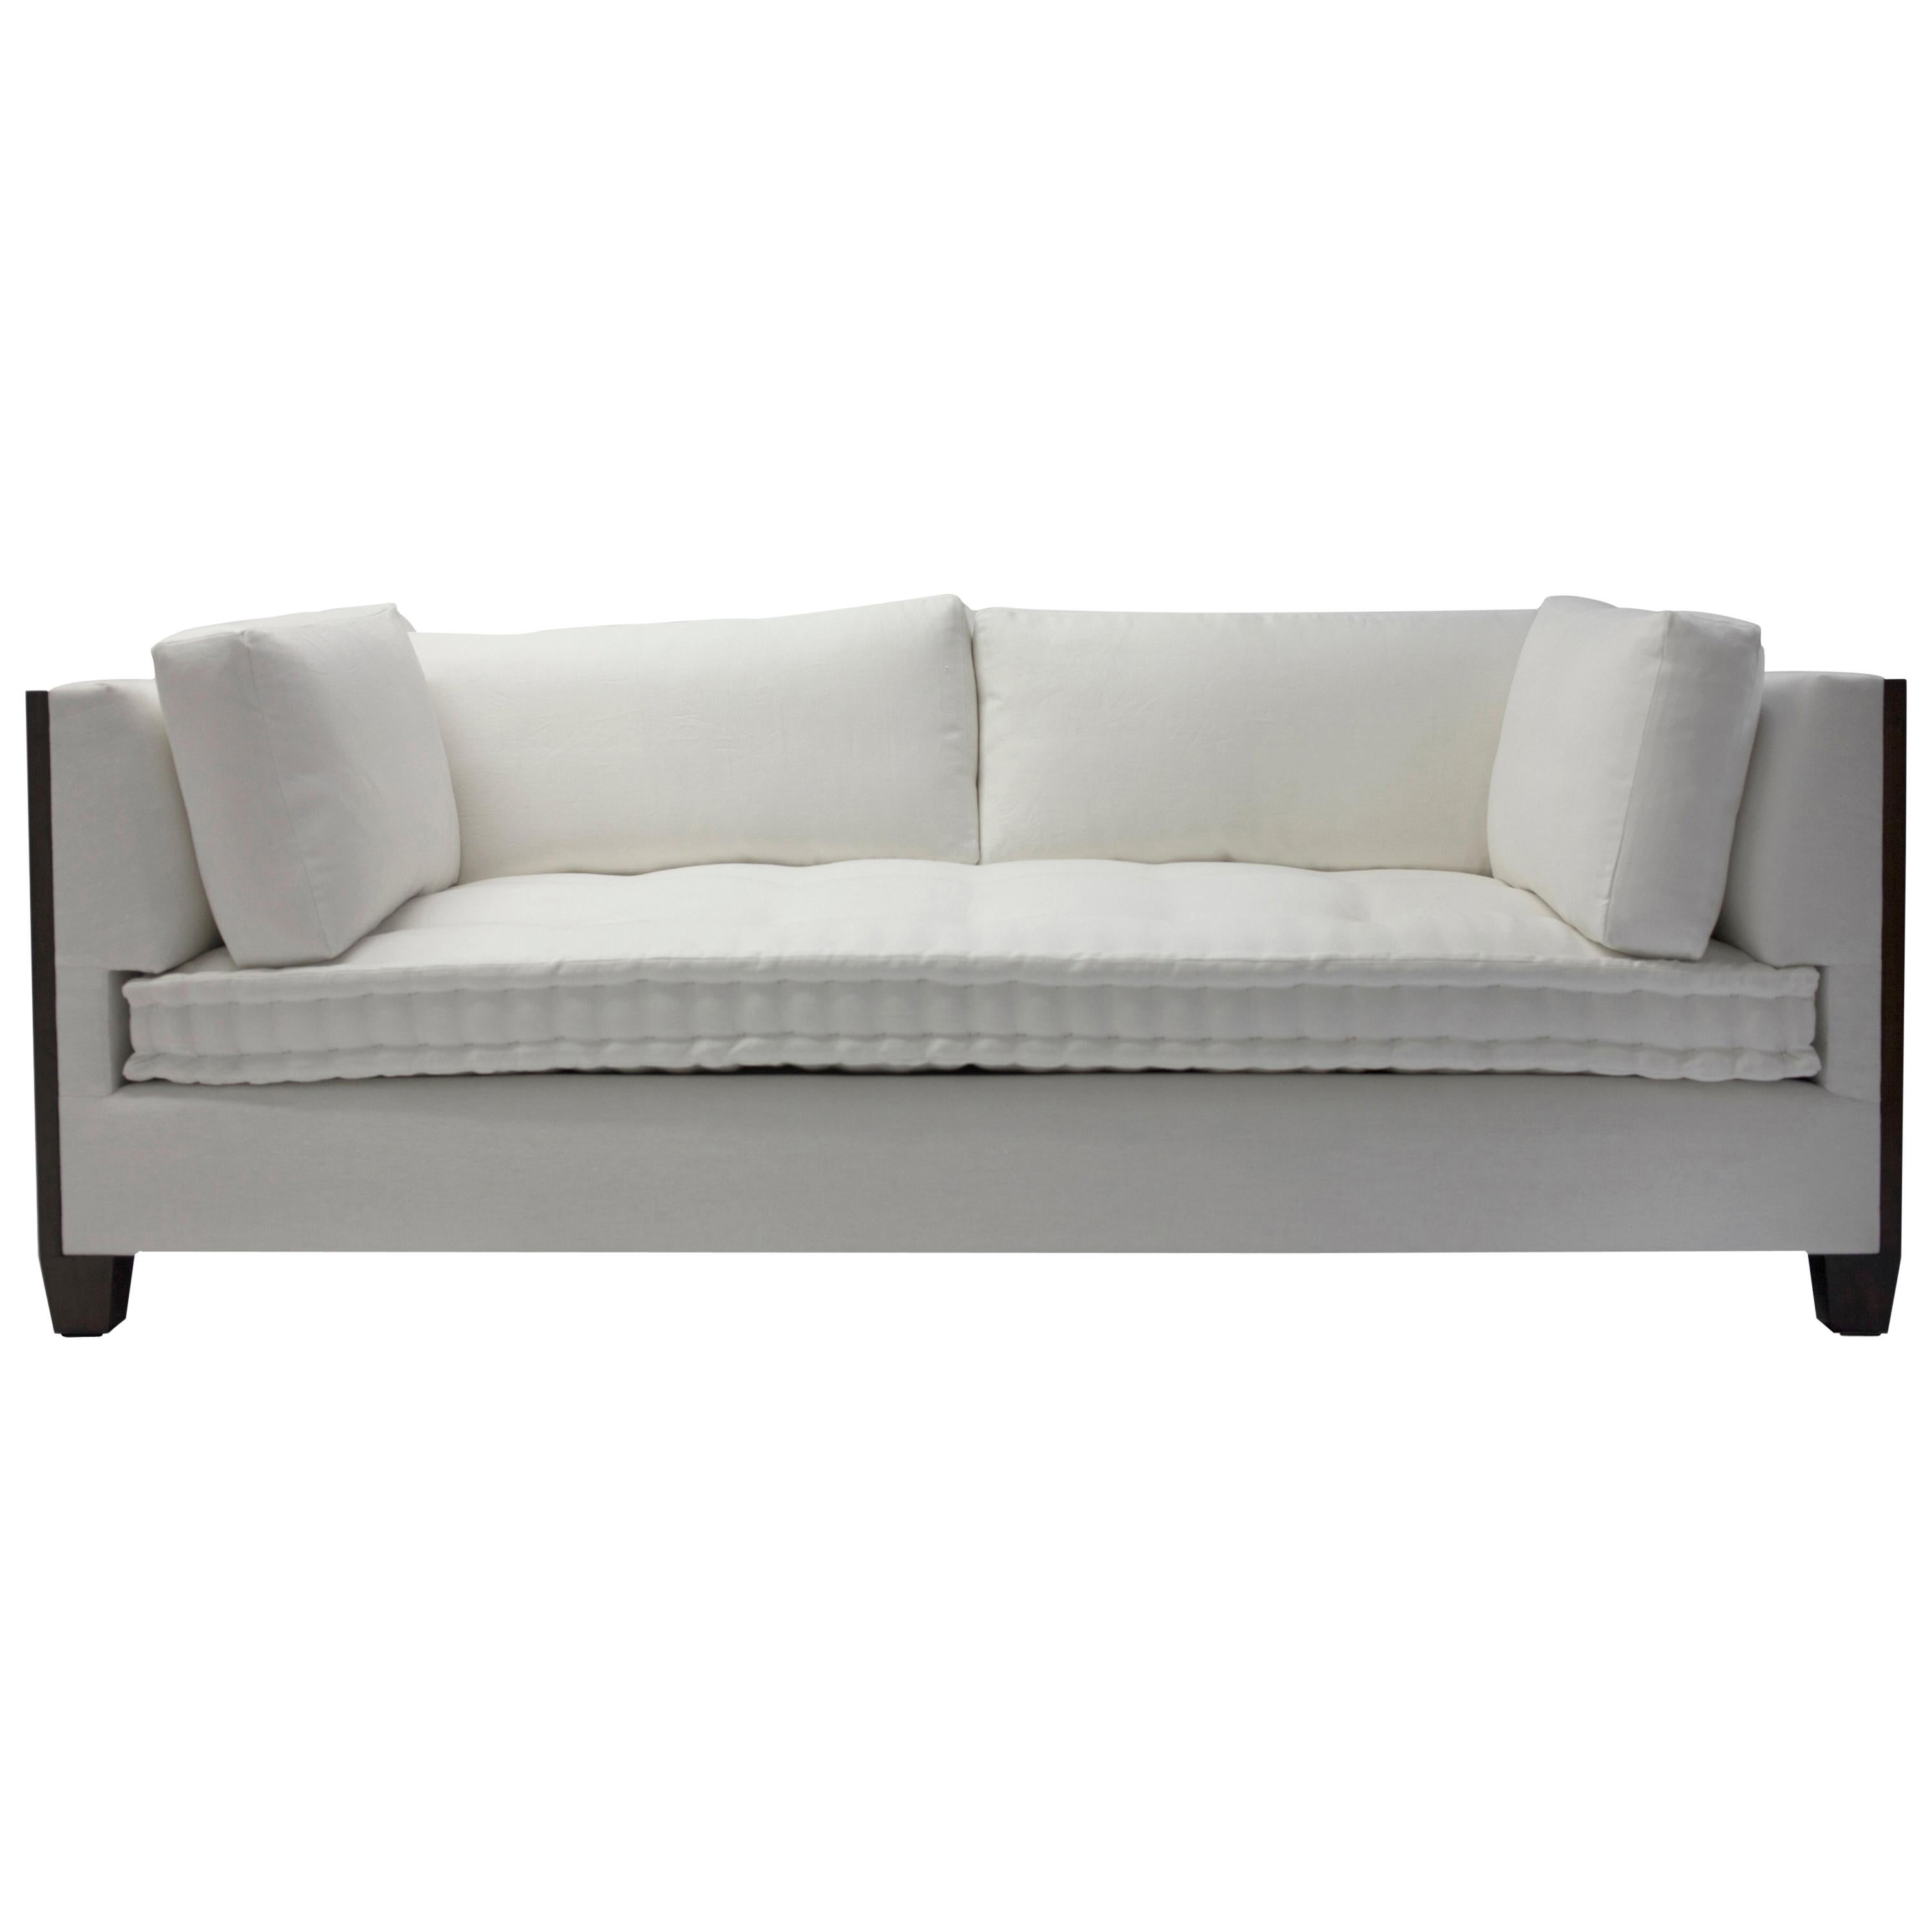 Custom Sofa with Wood Surround at Arms with Loose Back and Side Cushions For Sale